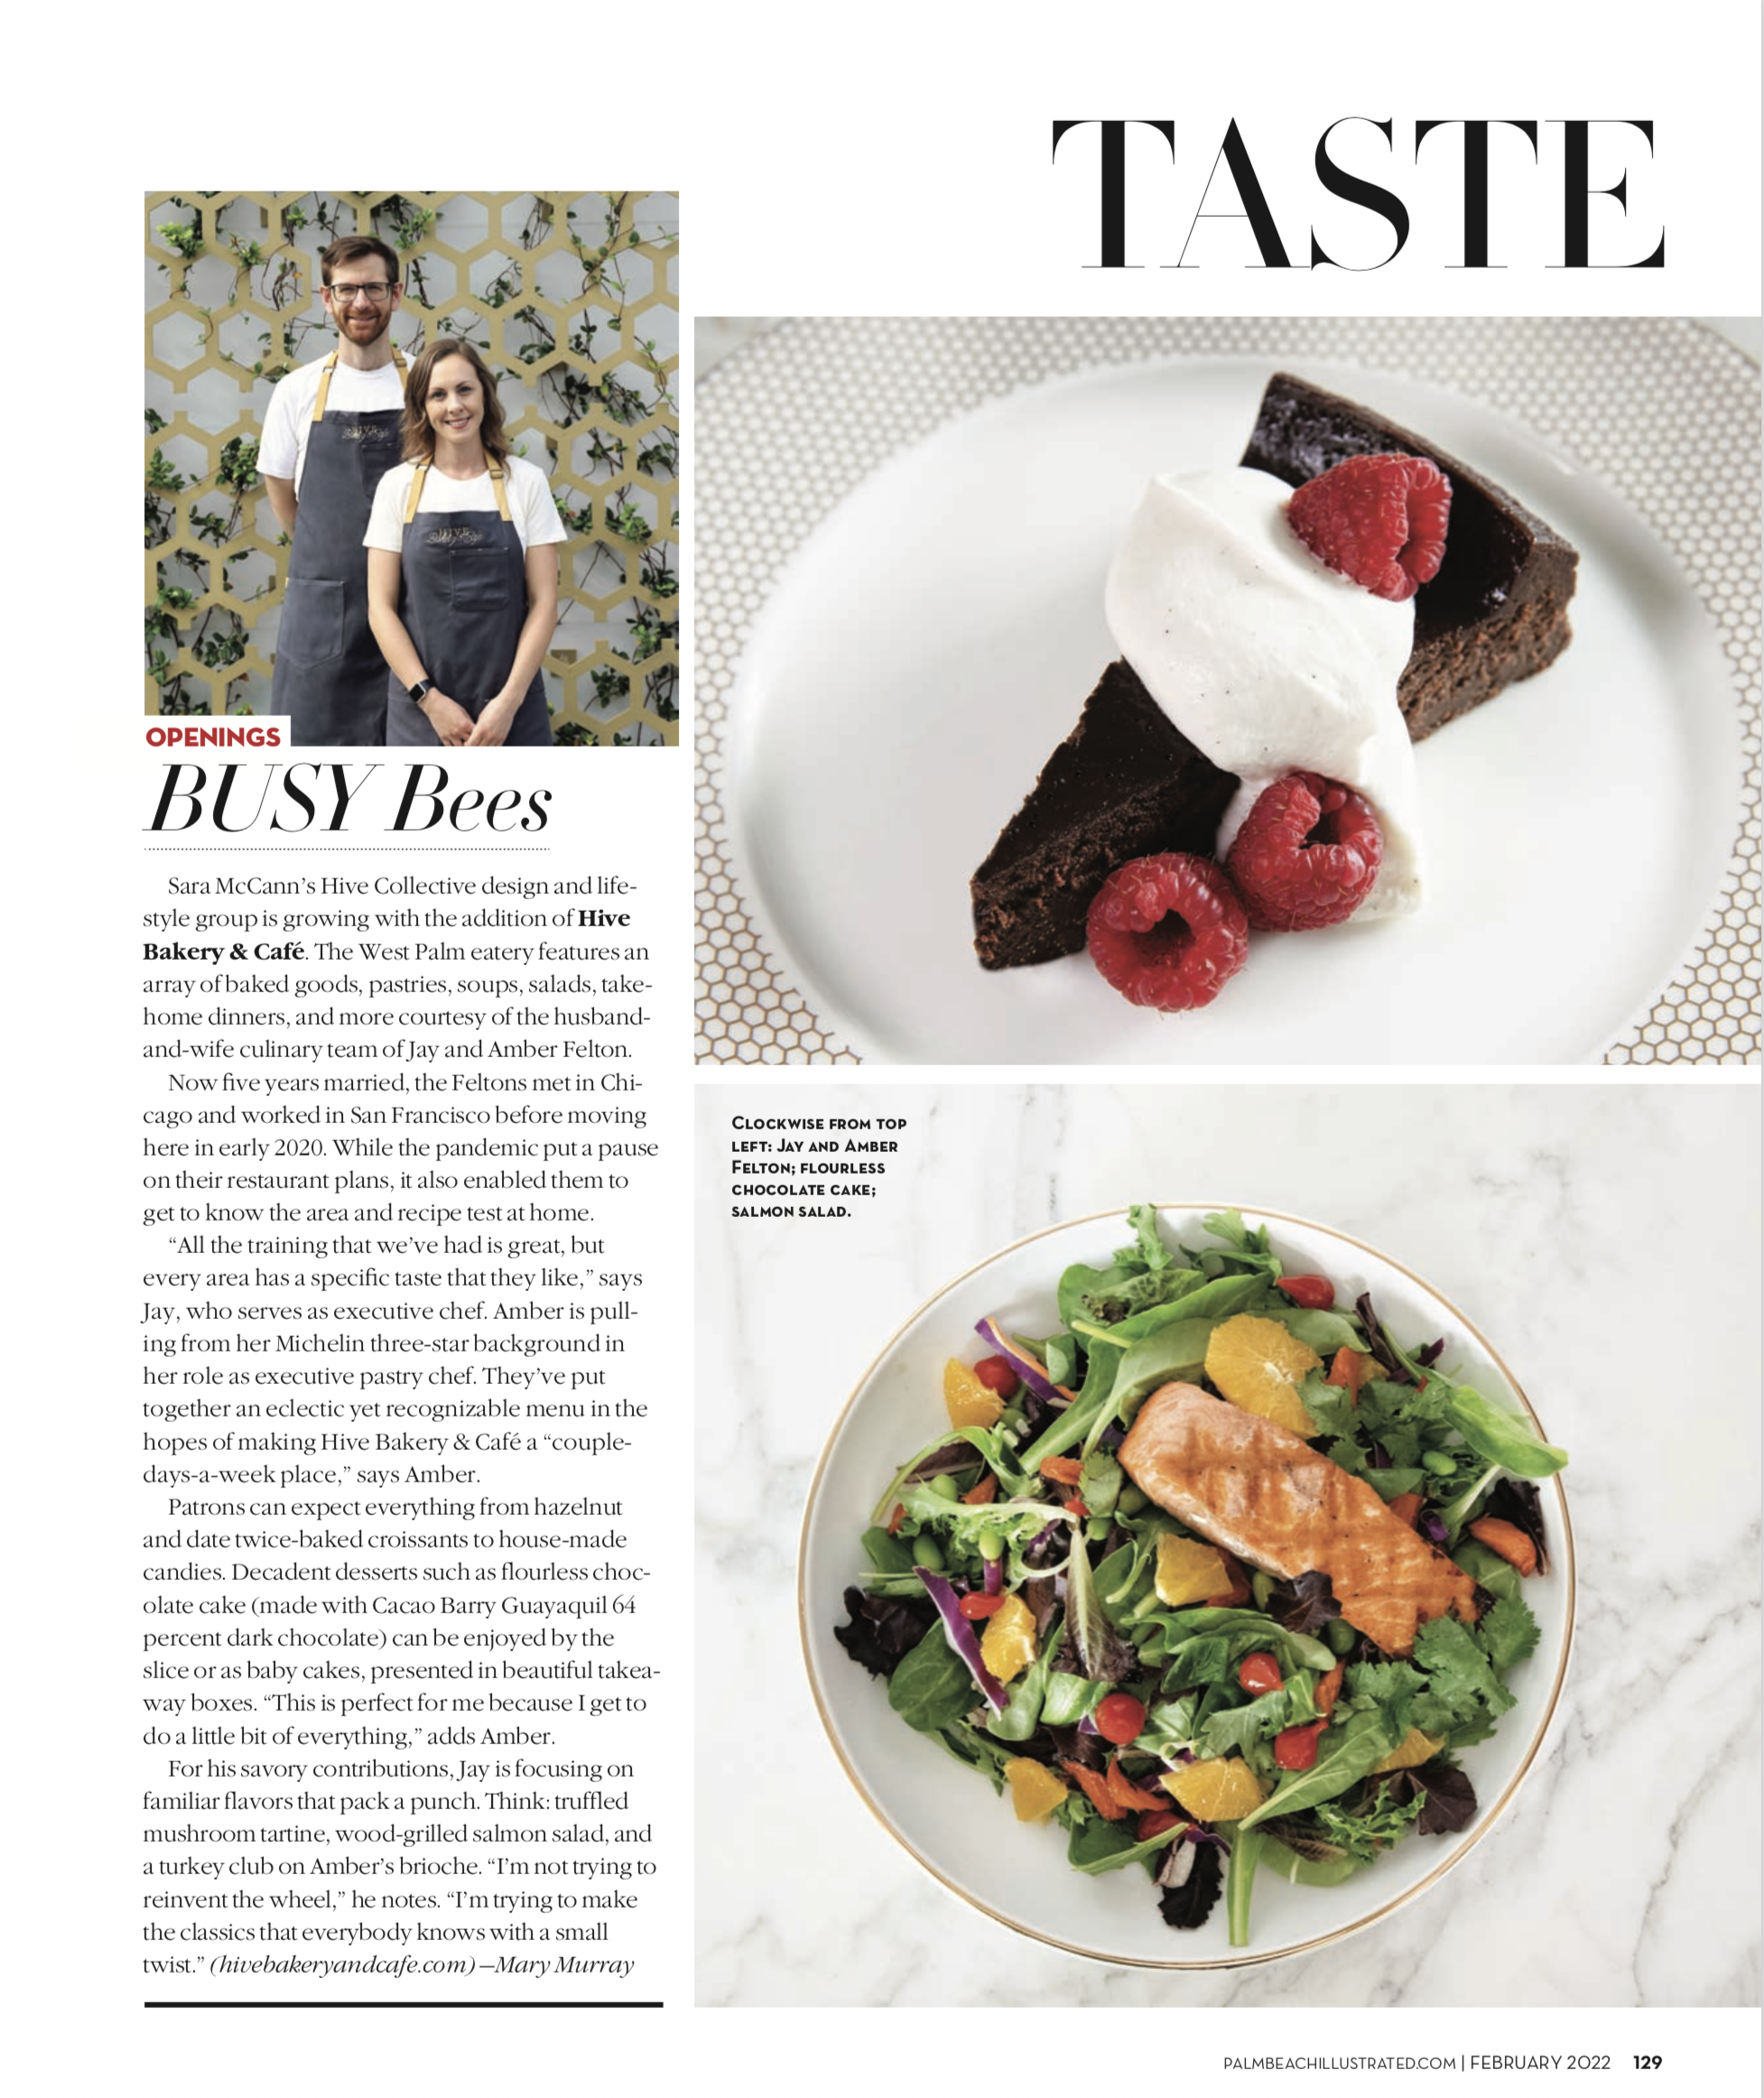 image of palm beach post article with hive bakery and cafe salmon salad and flourless chocolate cake and picture of chefs